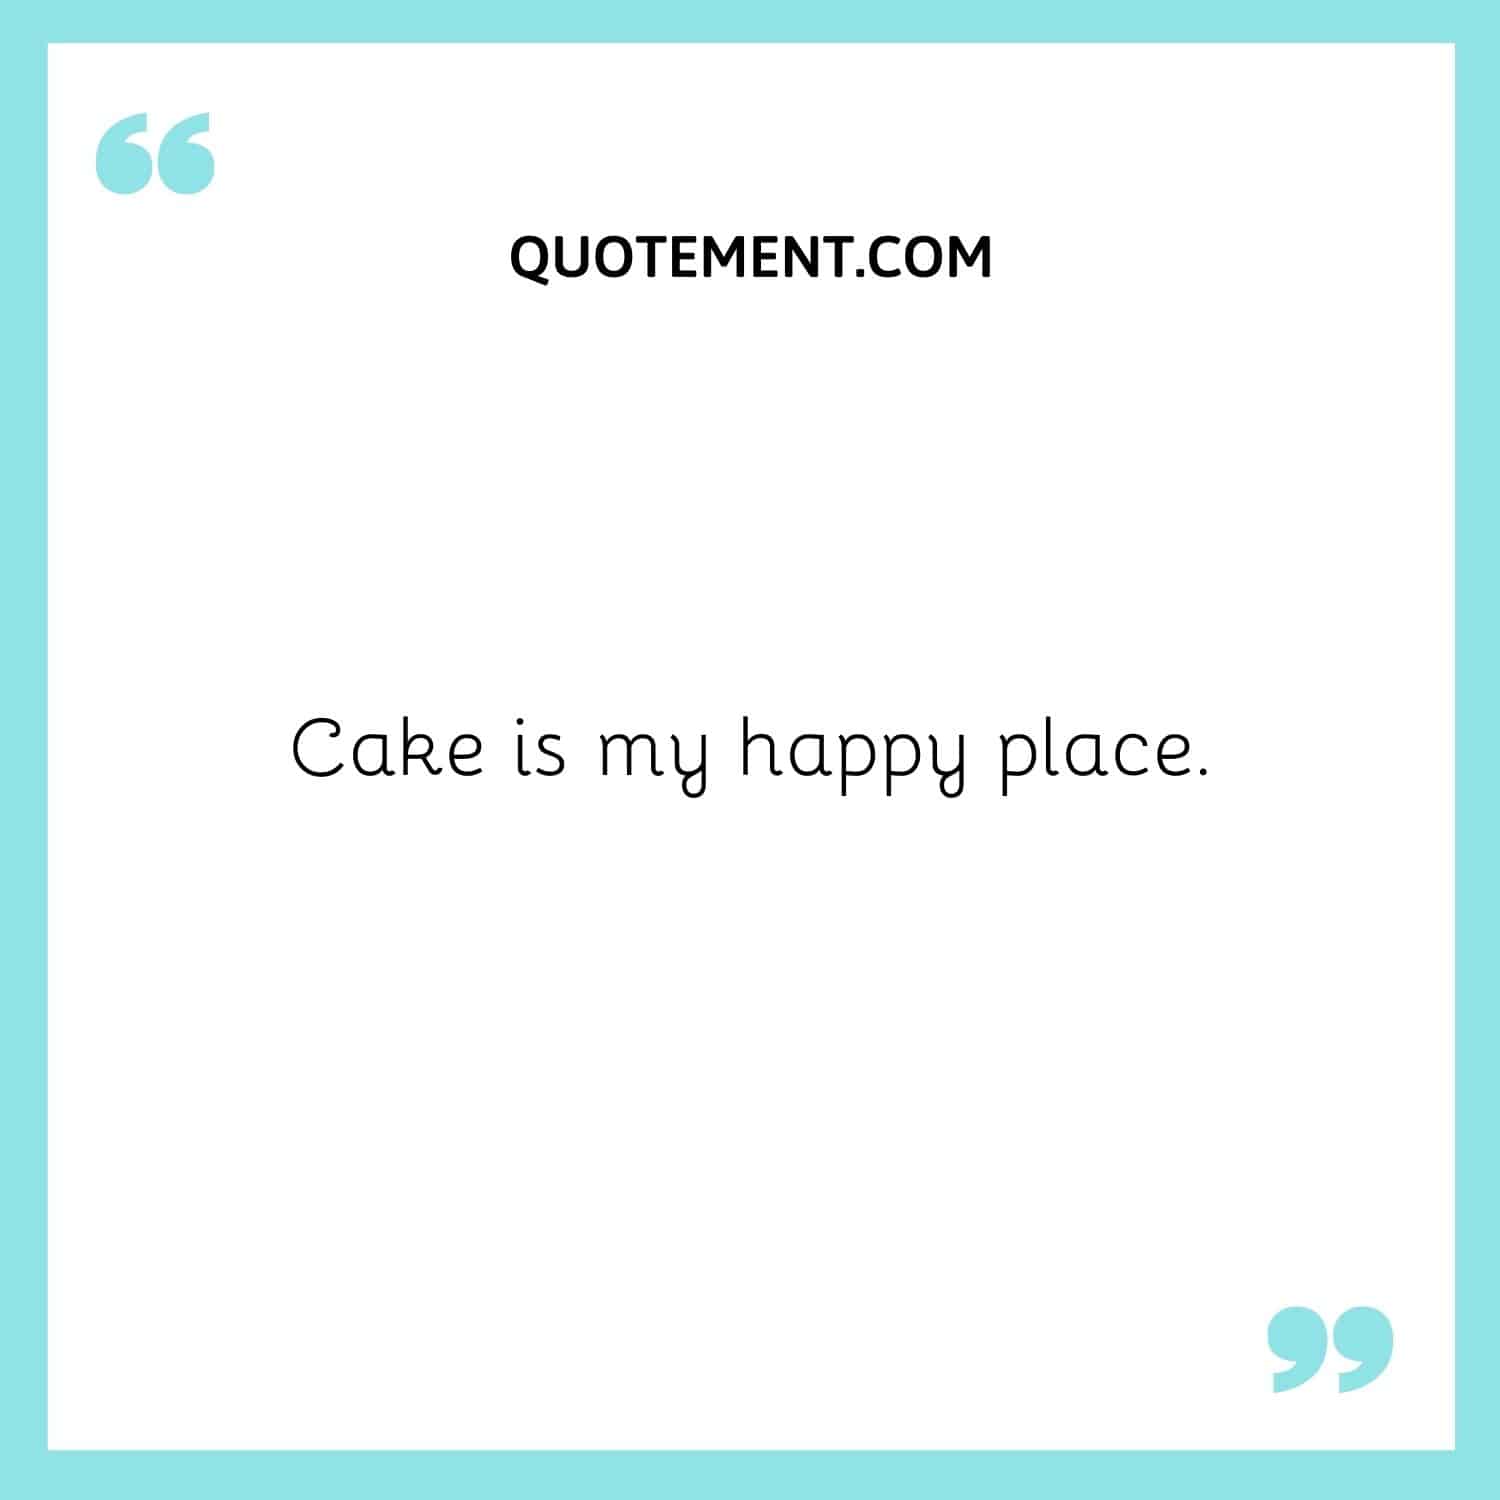 Cake is my happy place